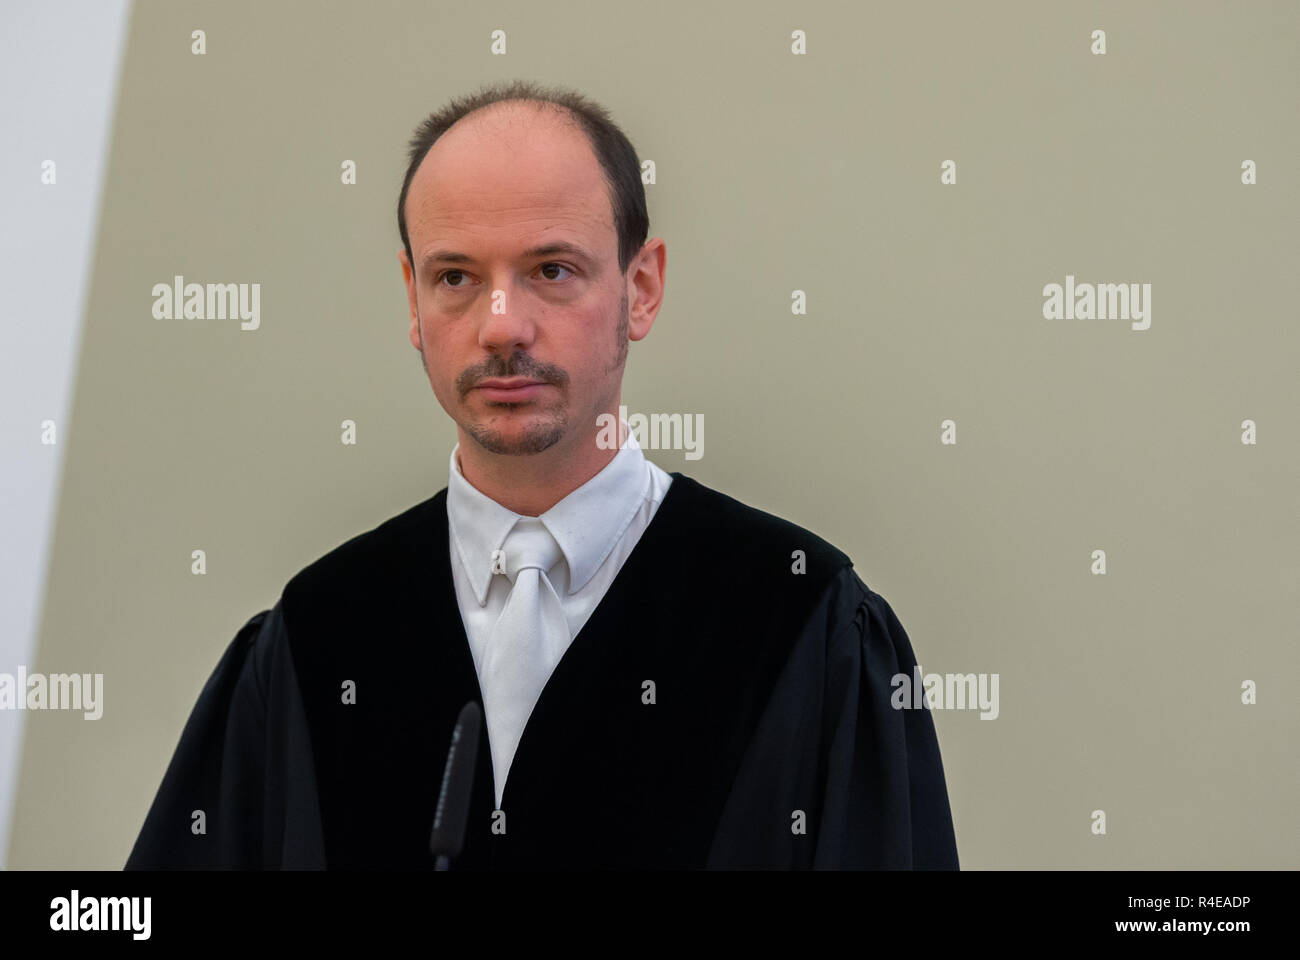 27 November 2018, Hessen, Gießen: Jost Holtzmann, judge at the Regional Court of Gießen, is about to begin his trial in the courtroom of the Regional Court. About three years ago, the son of the billionaire Würth was kidnapped. Together with accomplices, the accused is said to have kidnapped the handicapped son of the Baden-Württemberg entrepreneur Reinhold Würth in June 2015 in Schlitz, East Hesse, and demanded a ransom of three million euros. After a failed handover the victim was found one day later in a forest near Würzburg, unharmed and chained to a tree. Photo: Silas Stein/dpa Stock Photo